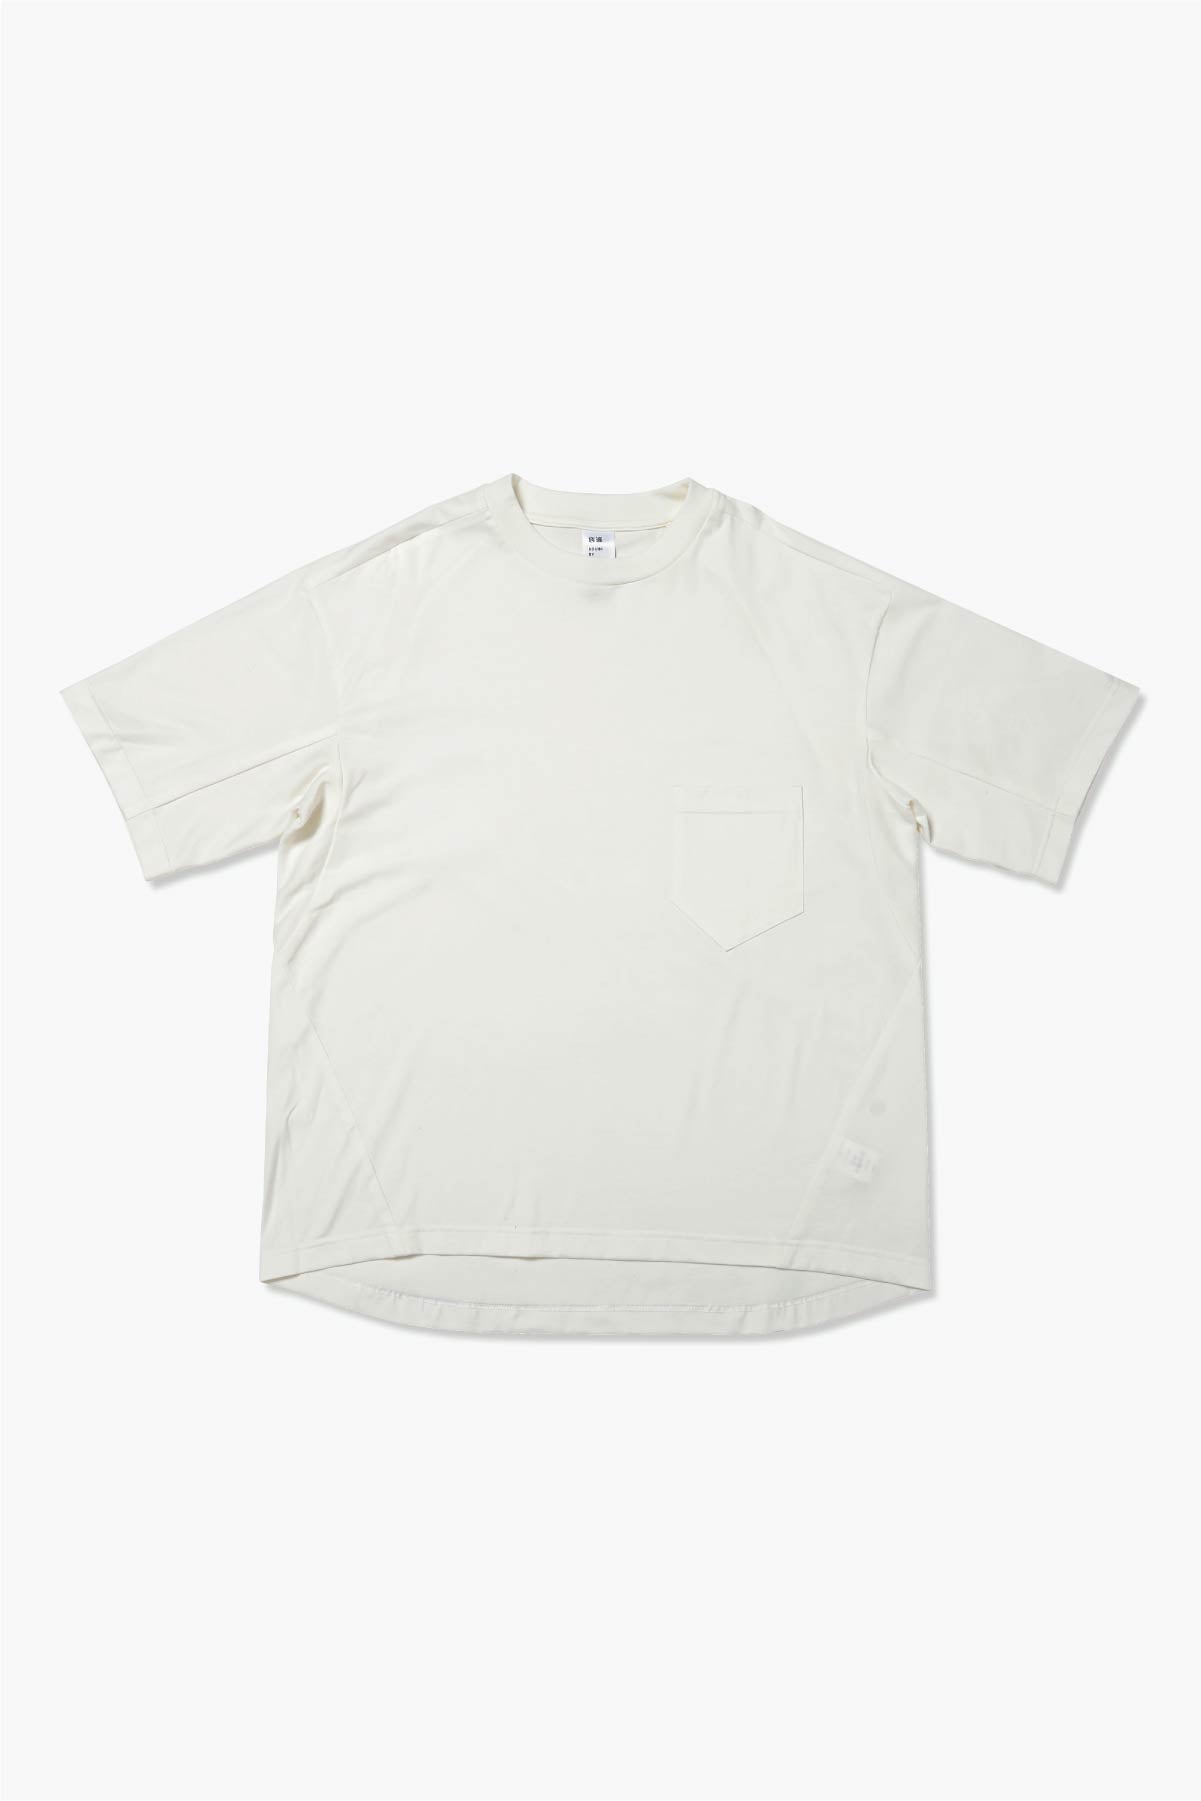 Stereo type T-Shirts 【Pocket】